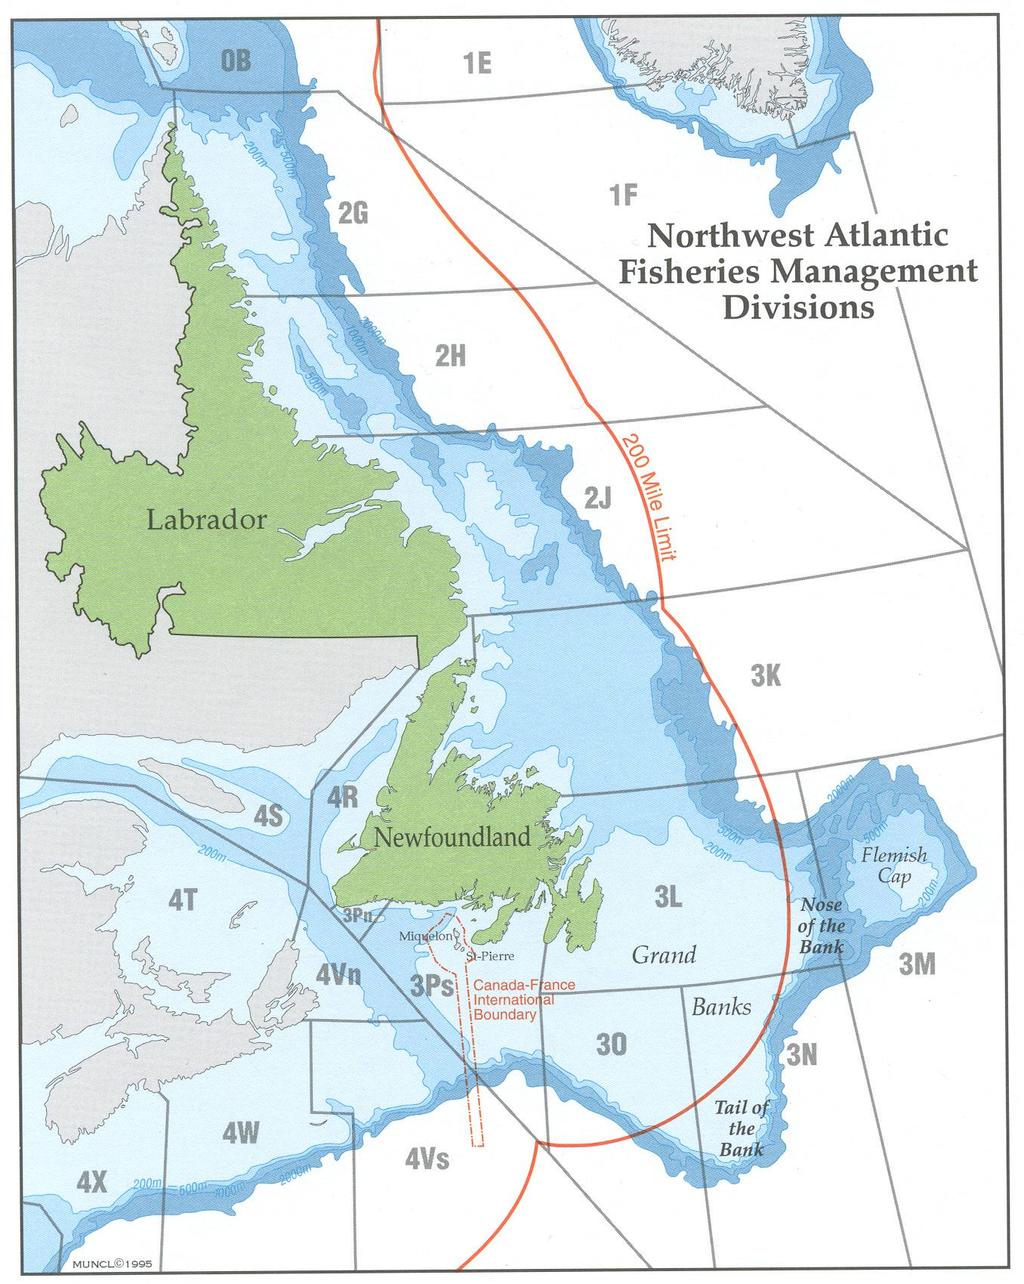 WEATHER CONSIDERATIONS: NEWFOUNDLAND AND LABRADOR HAS A LARGE AND DIVERSE COASTLINE WITH SIGNIFICANT VARIATION IN